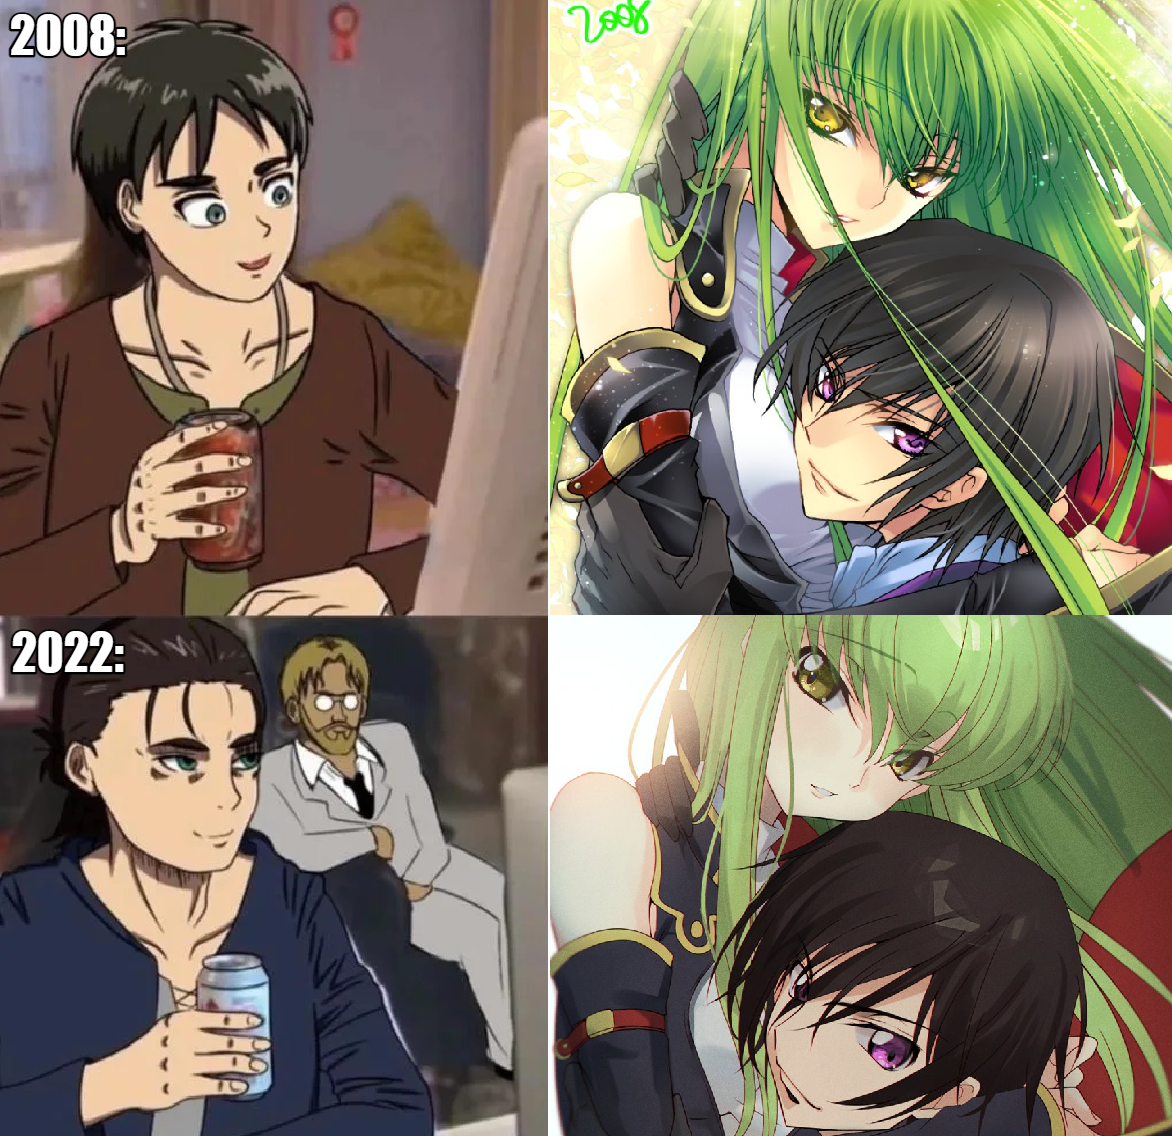 The sheer loyalty of this one artist drawing only C.C and Lelouch fanart for 14 years